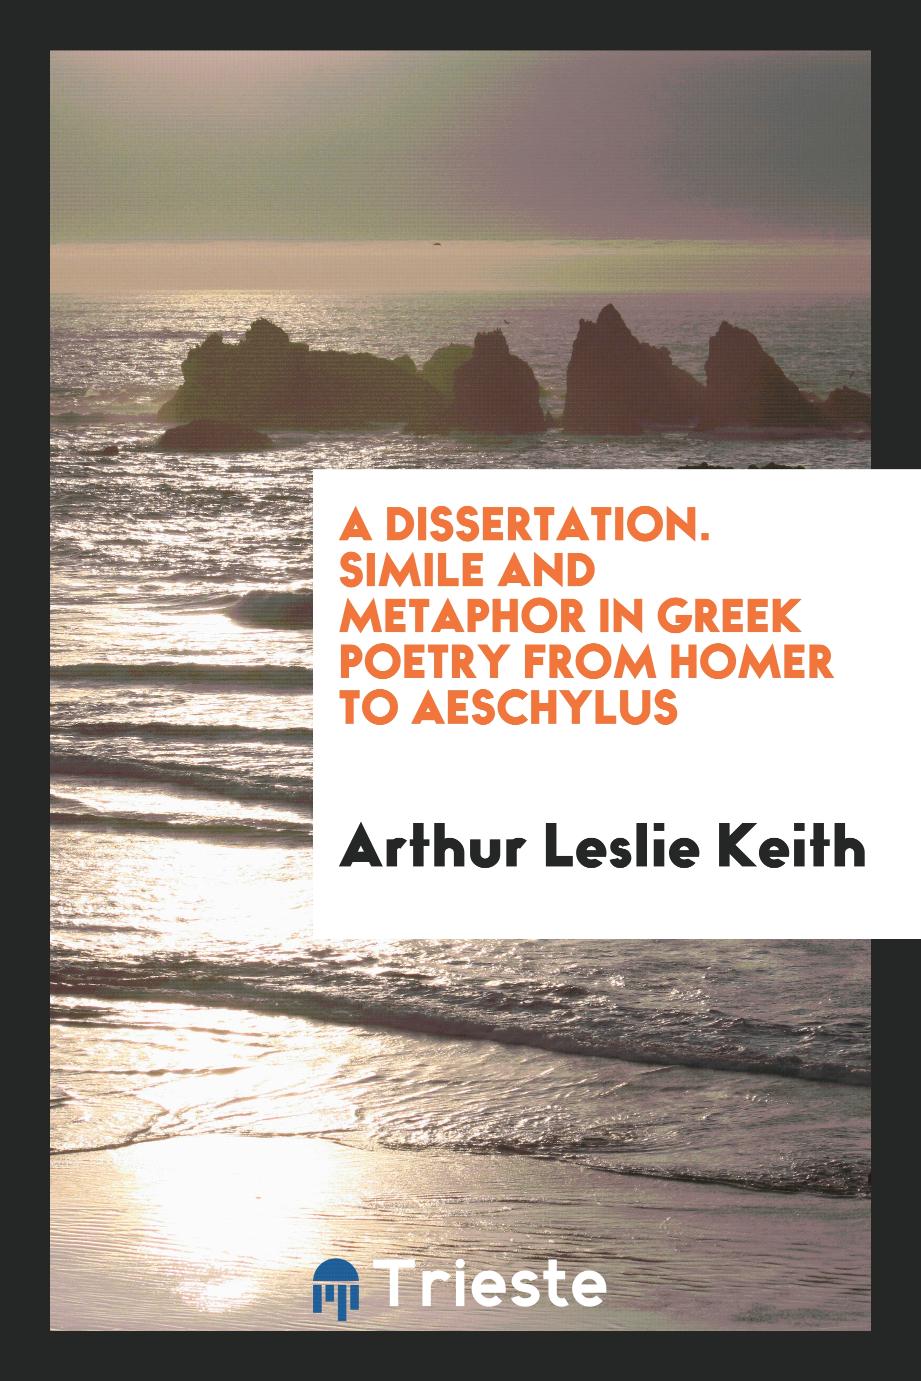 A Dissertation. Simile and Metaphor in Greek Poetry from Homer to Aeschylus